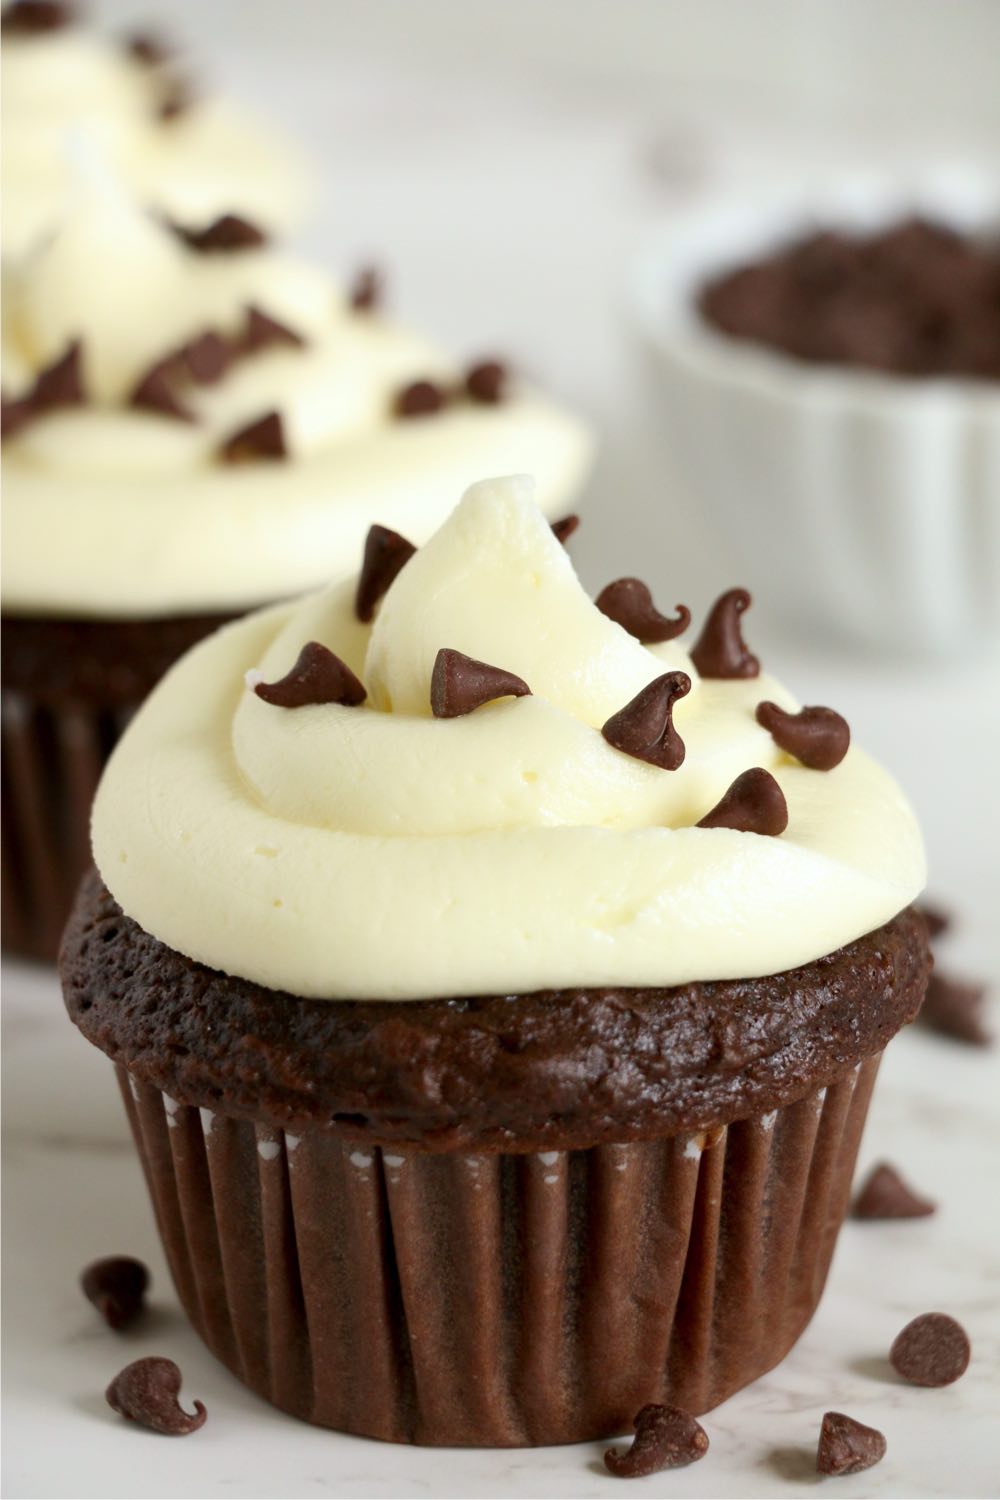 Chocolate cupcake with vanilla buttercream frosting